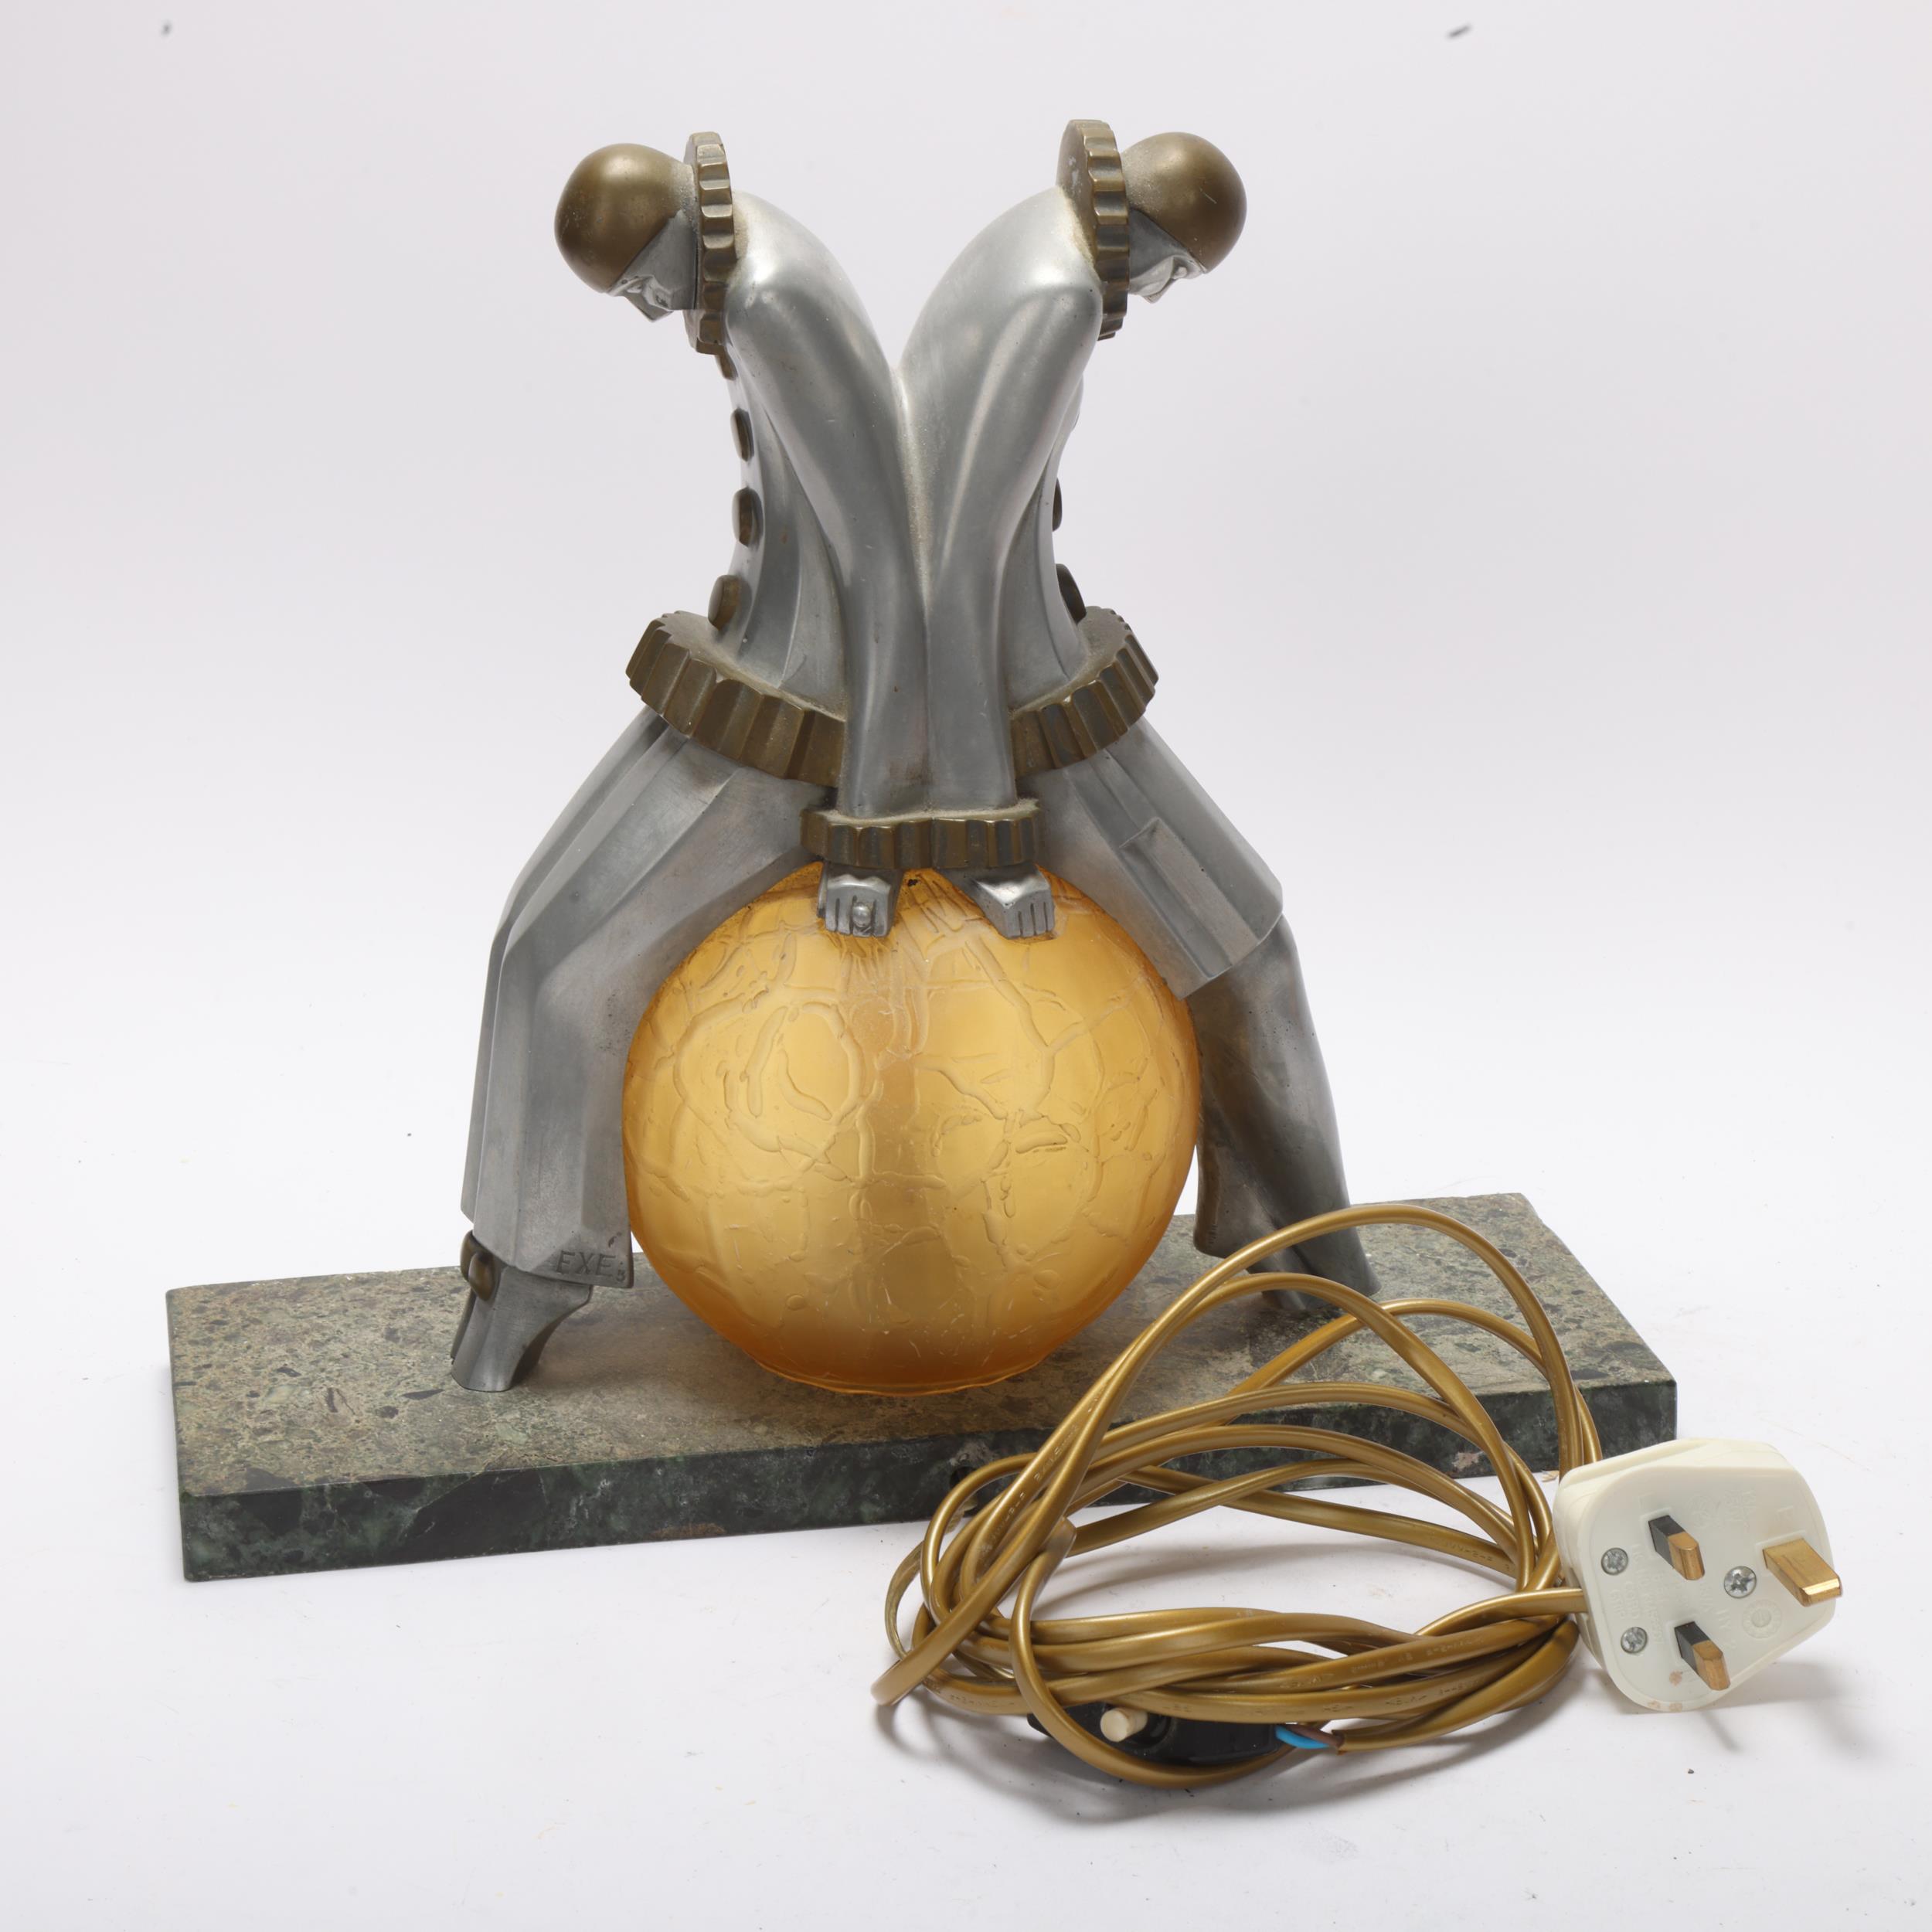 Art Deco aluminium and brass Pierrot clown design table lamp, with amber glass ball shade and marble - Image 2 of 3